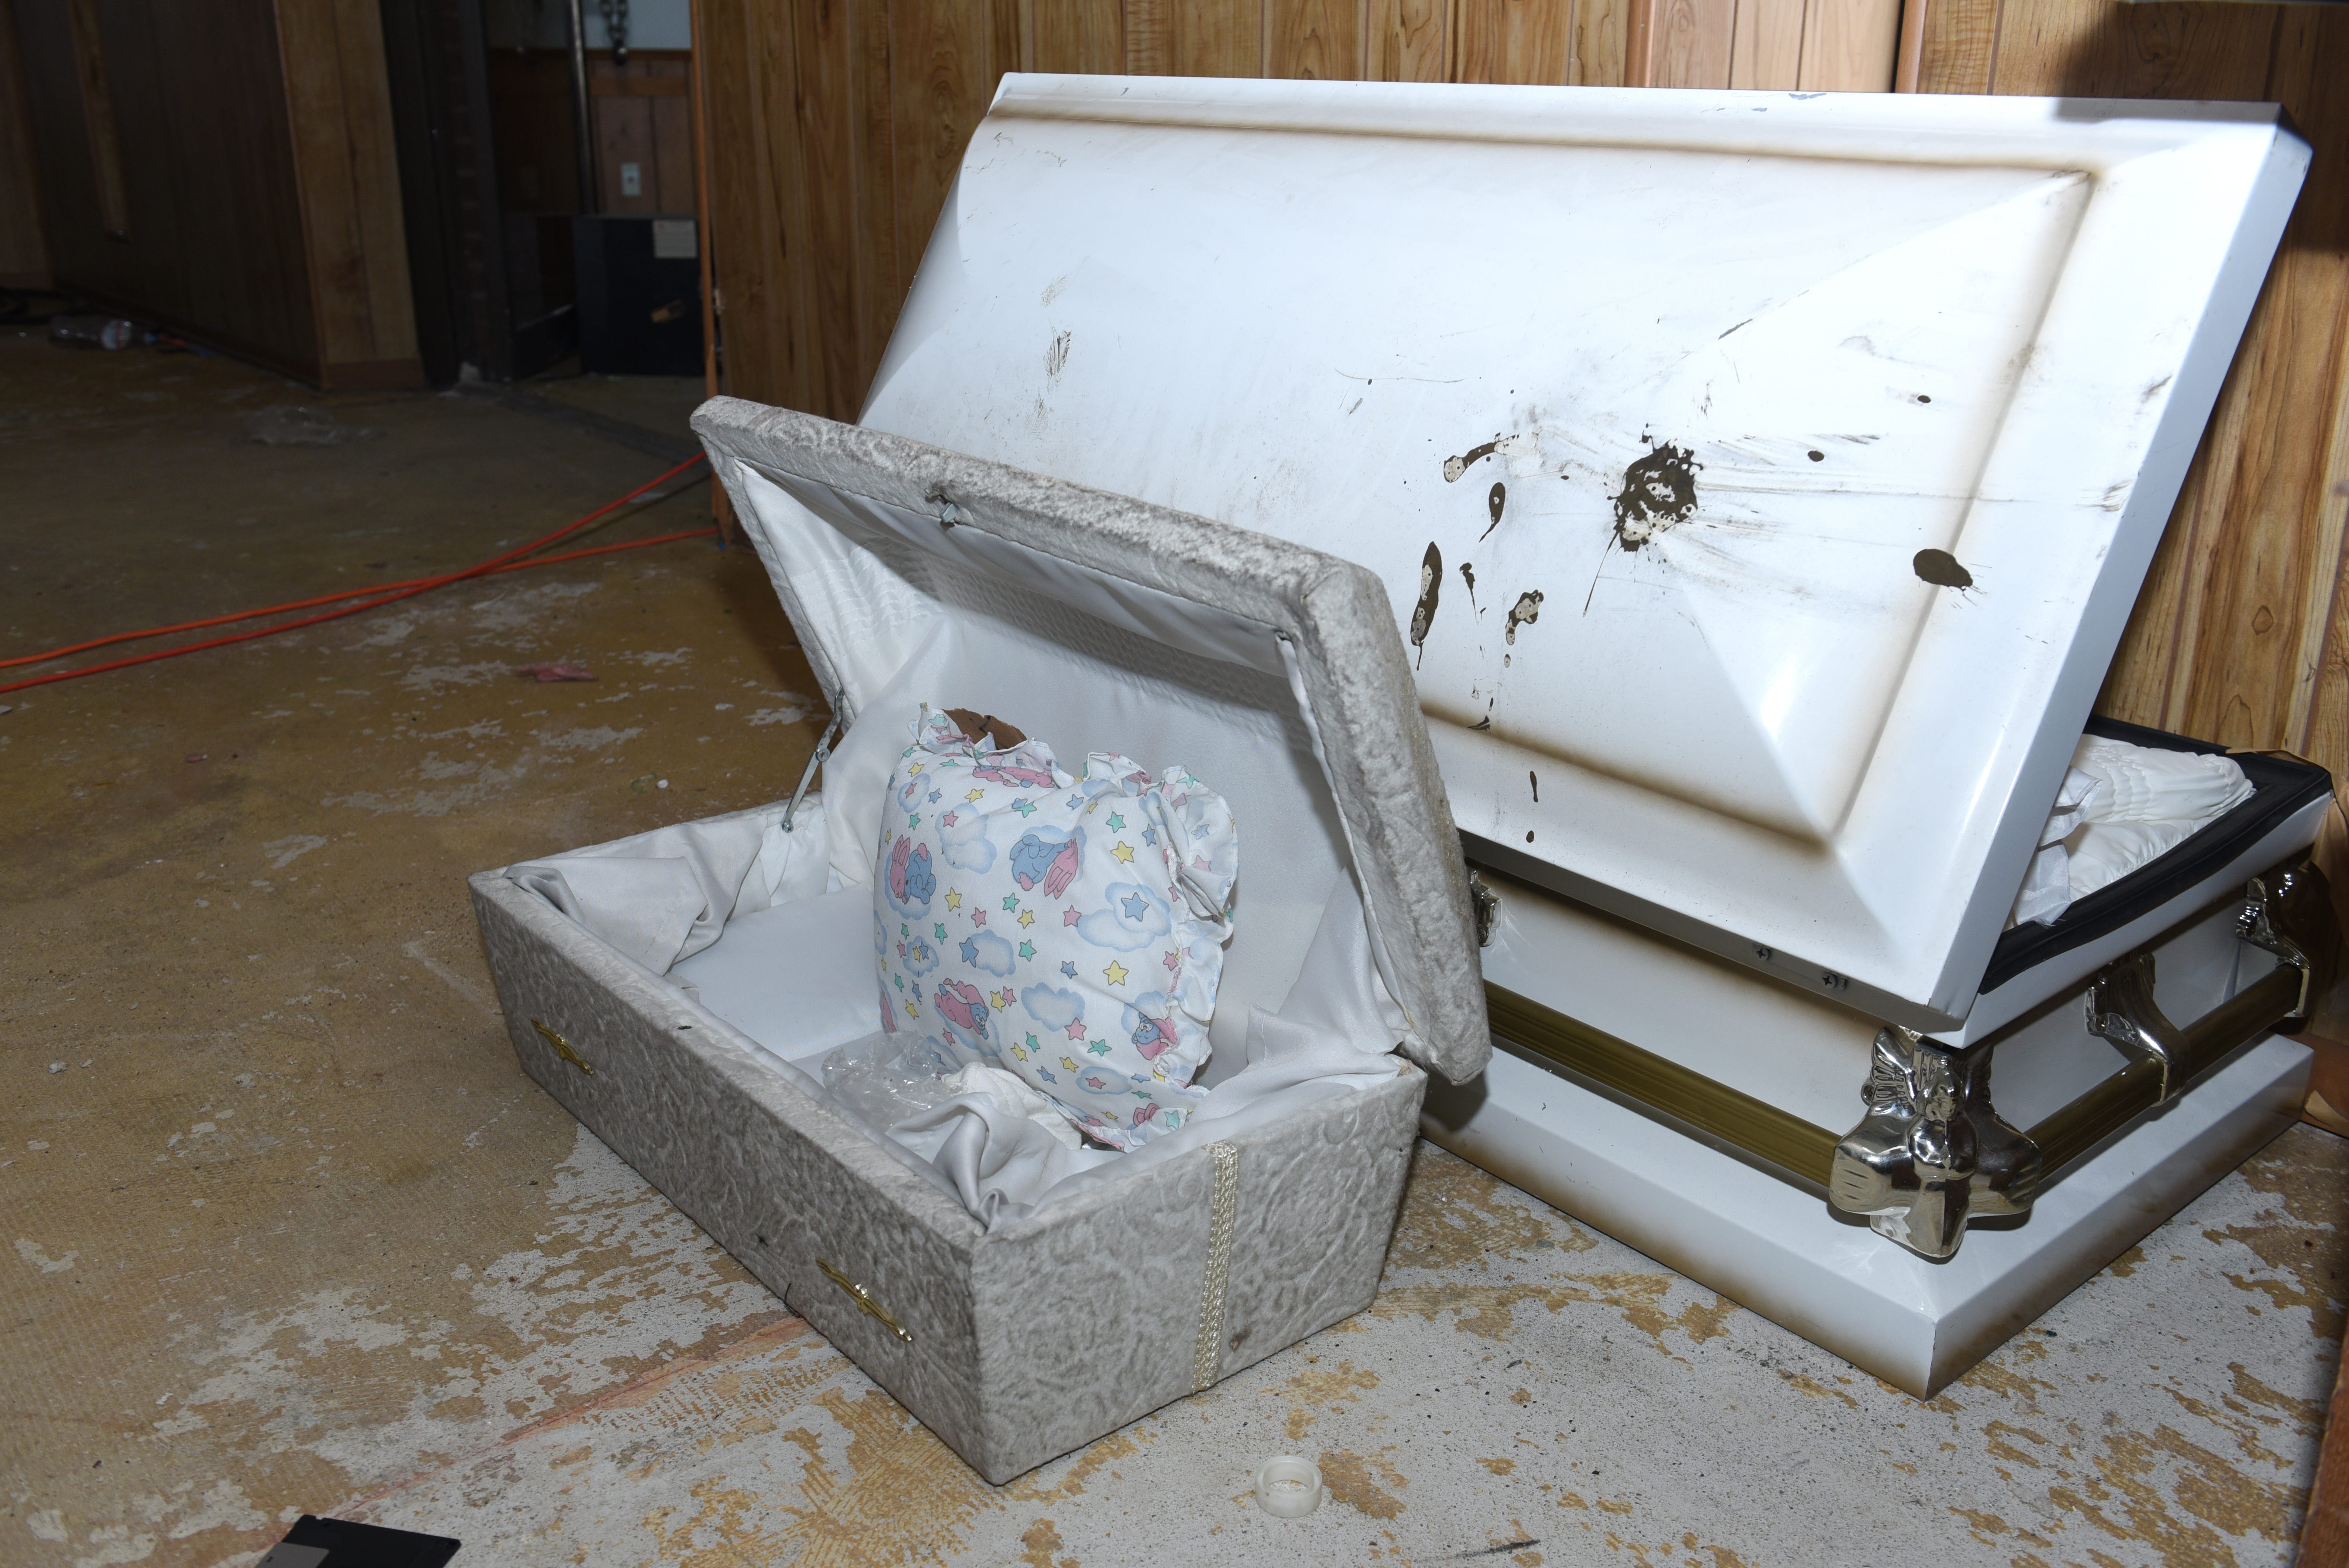 The small casket where some of the remains of the 11 infants were found  hidden in a ceiling compartment were still inside the former Cantrell Funeral Home on Saturday.